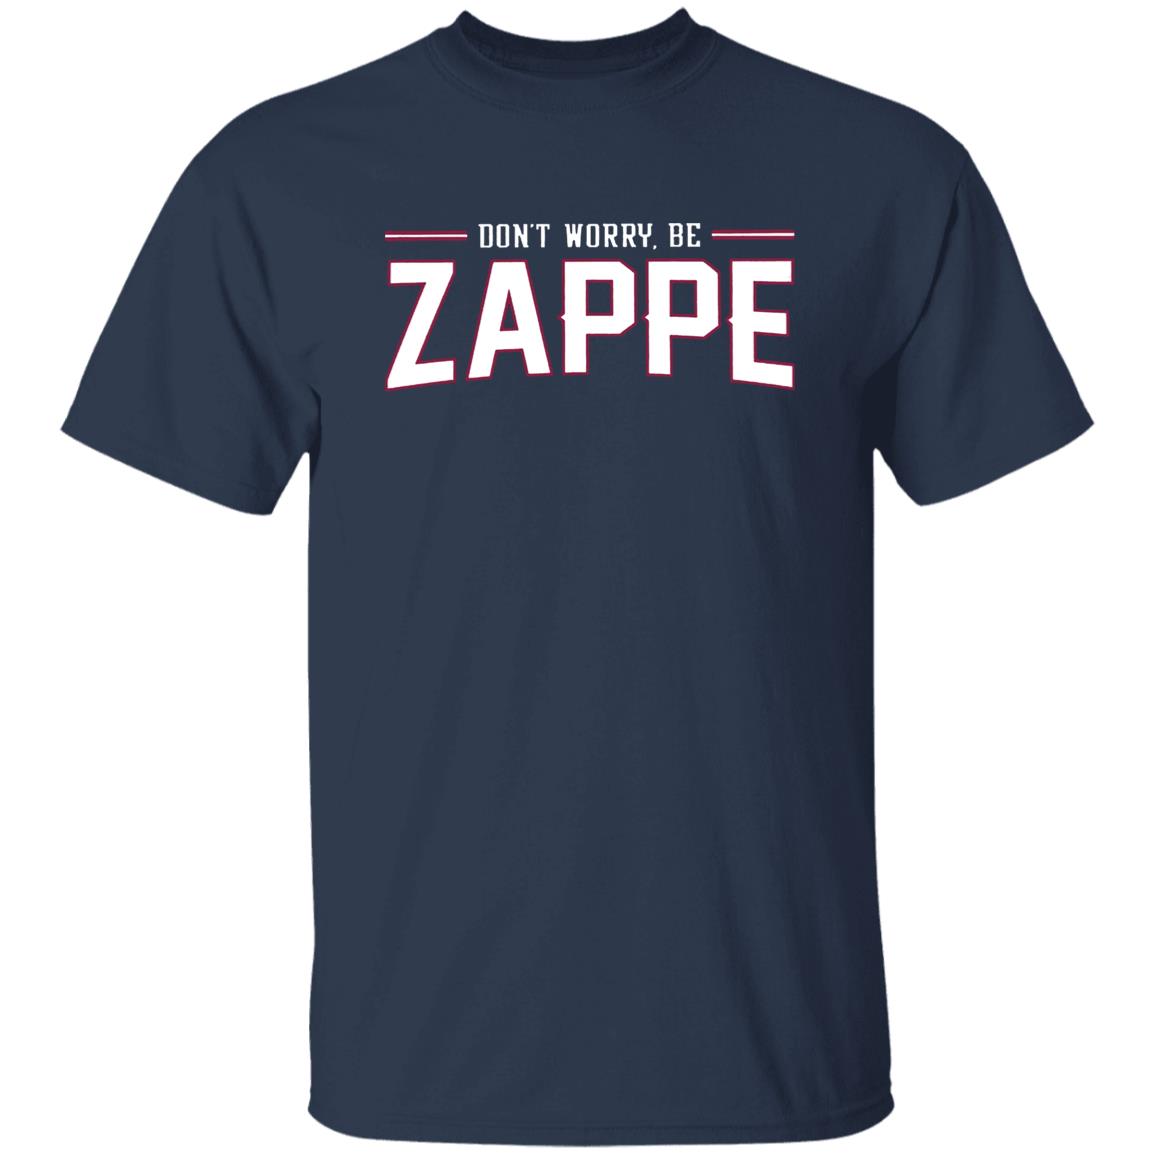 bailey zappe jersey sales